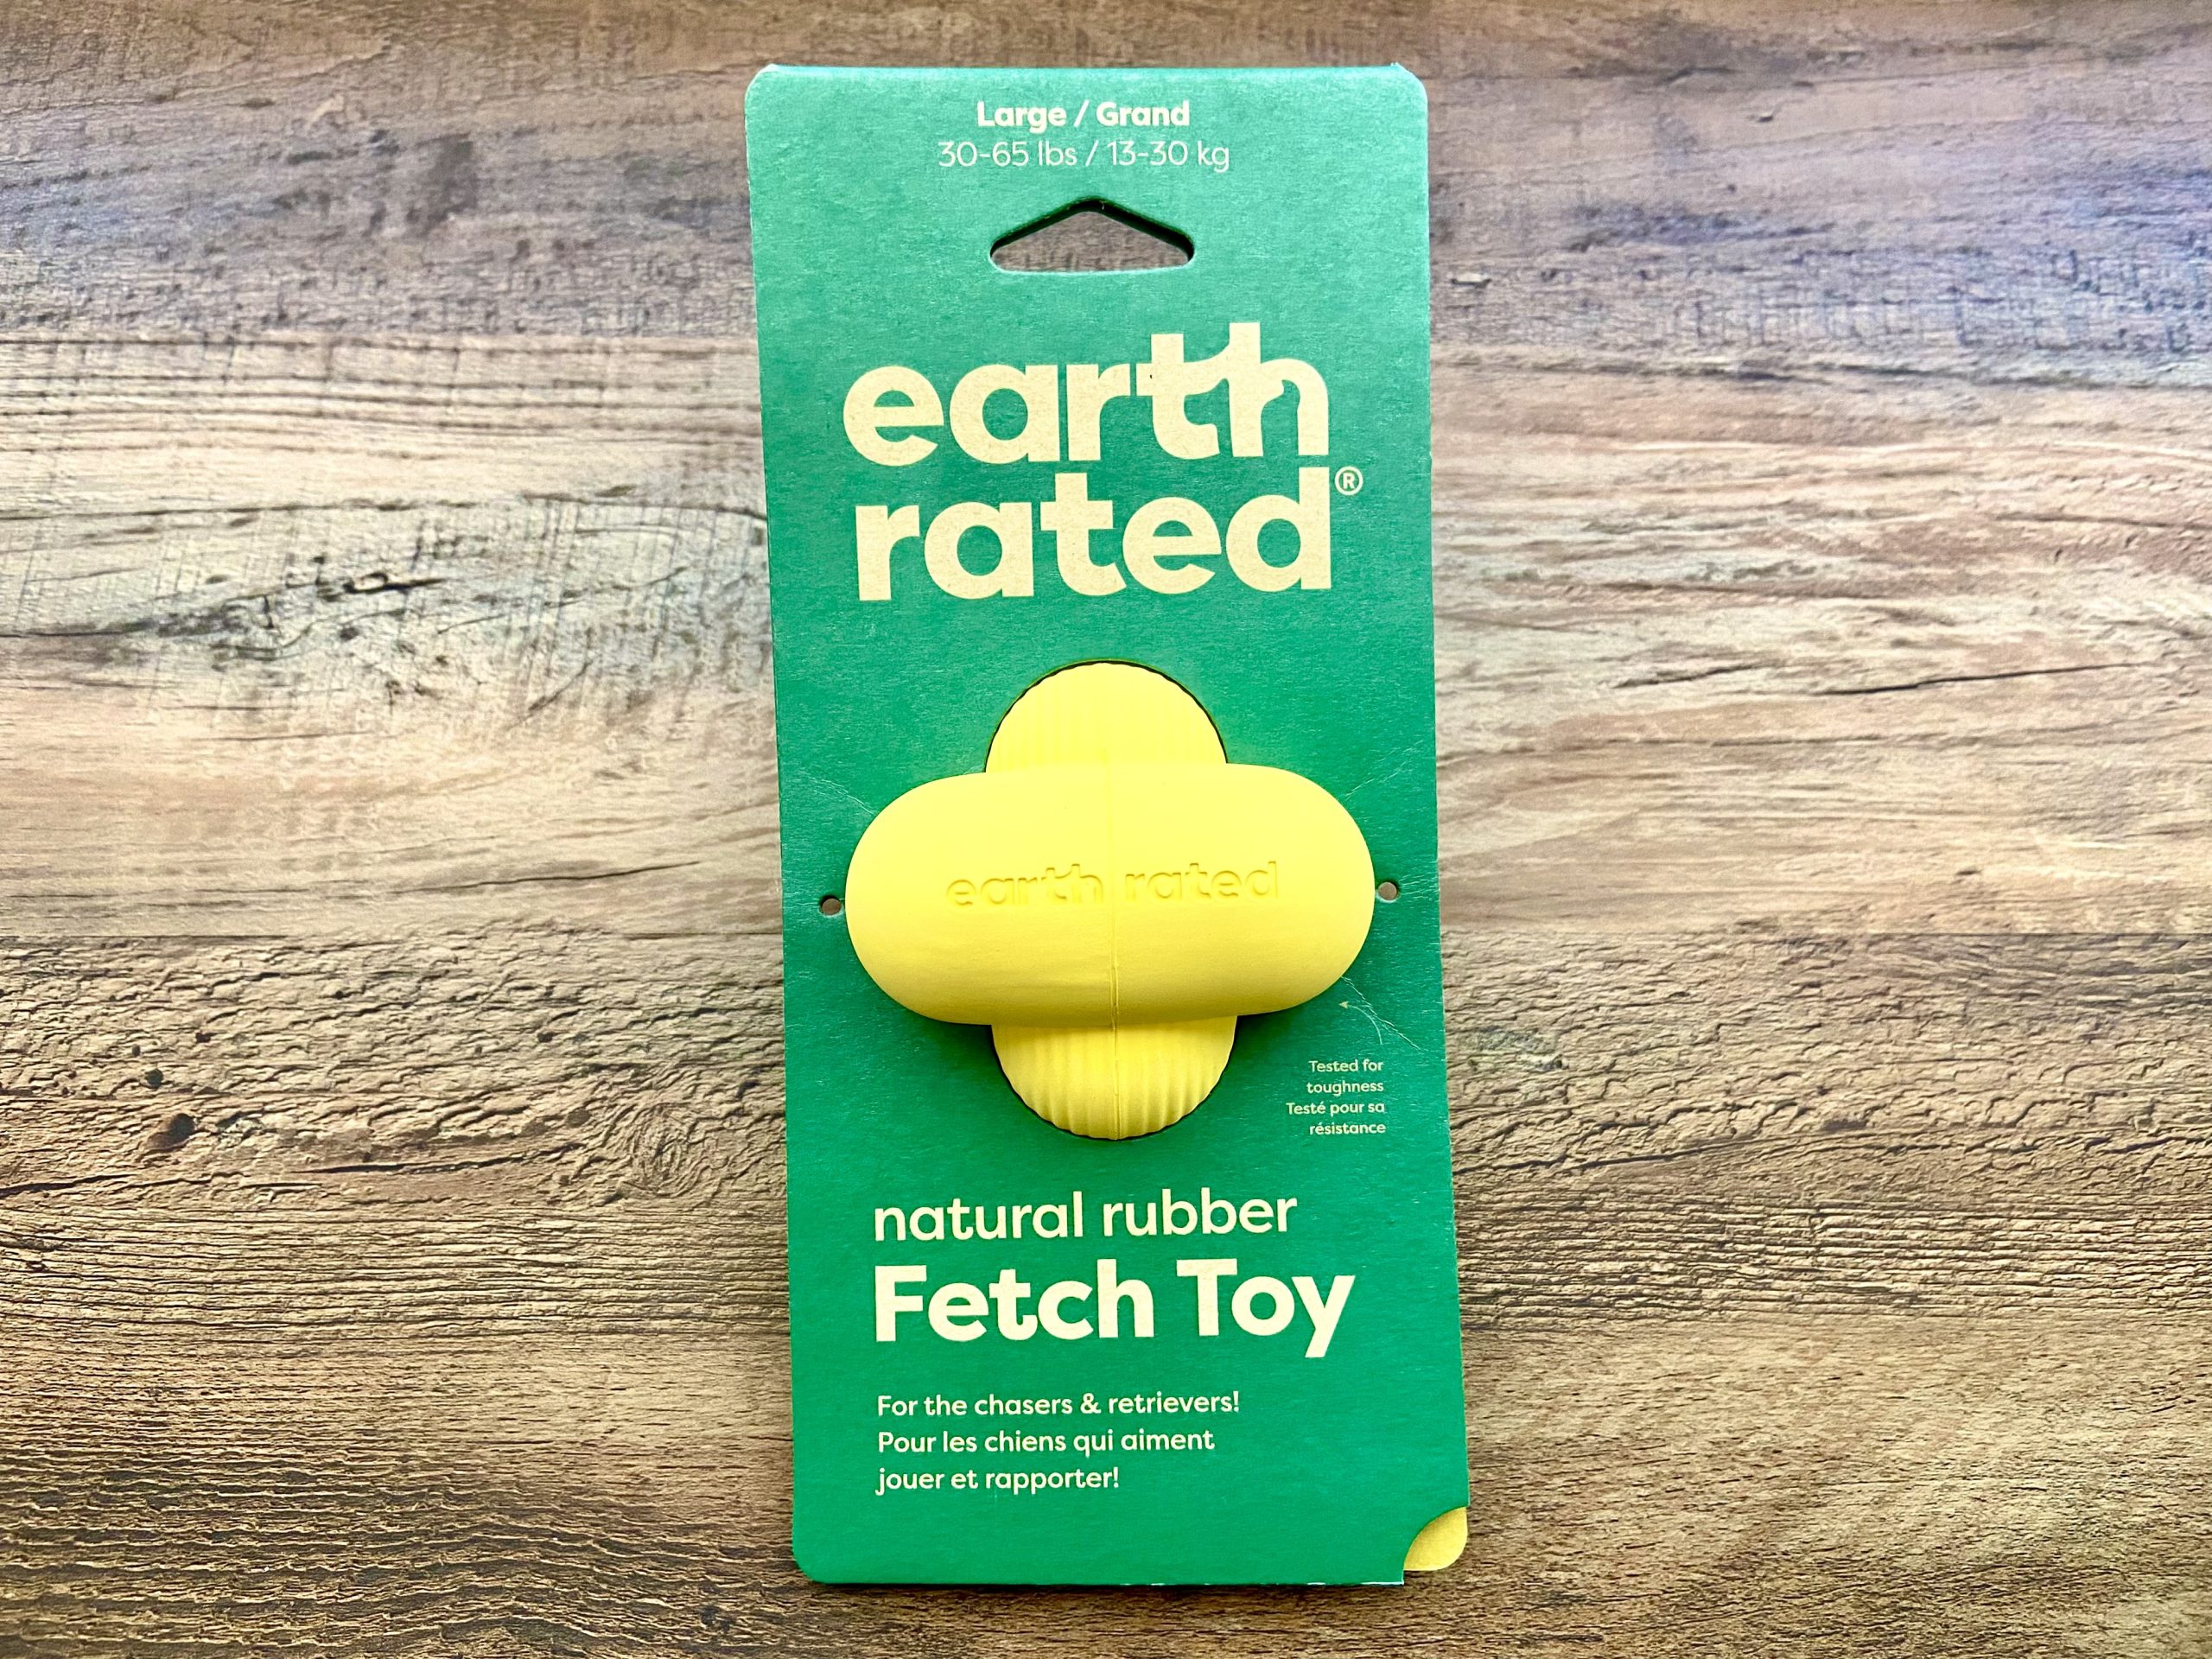 Earth rated Dog Toy